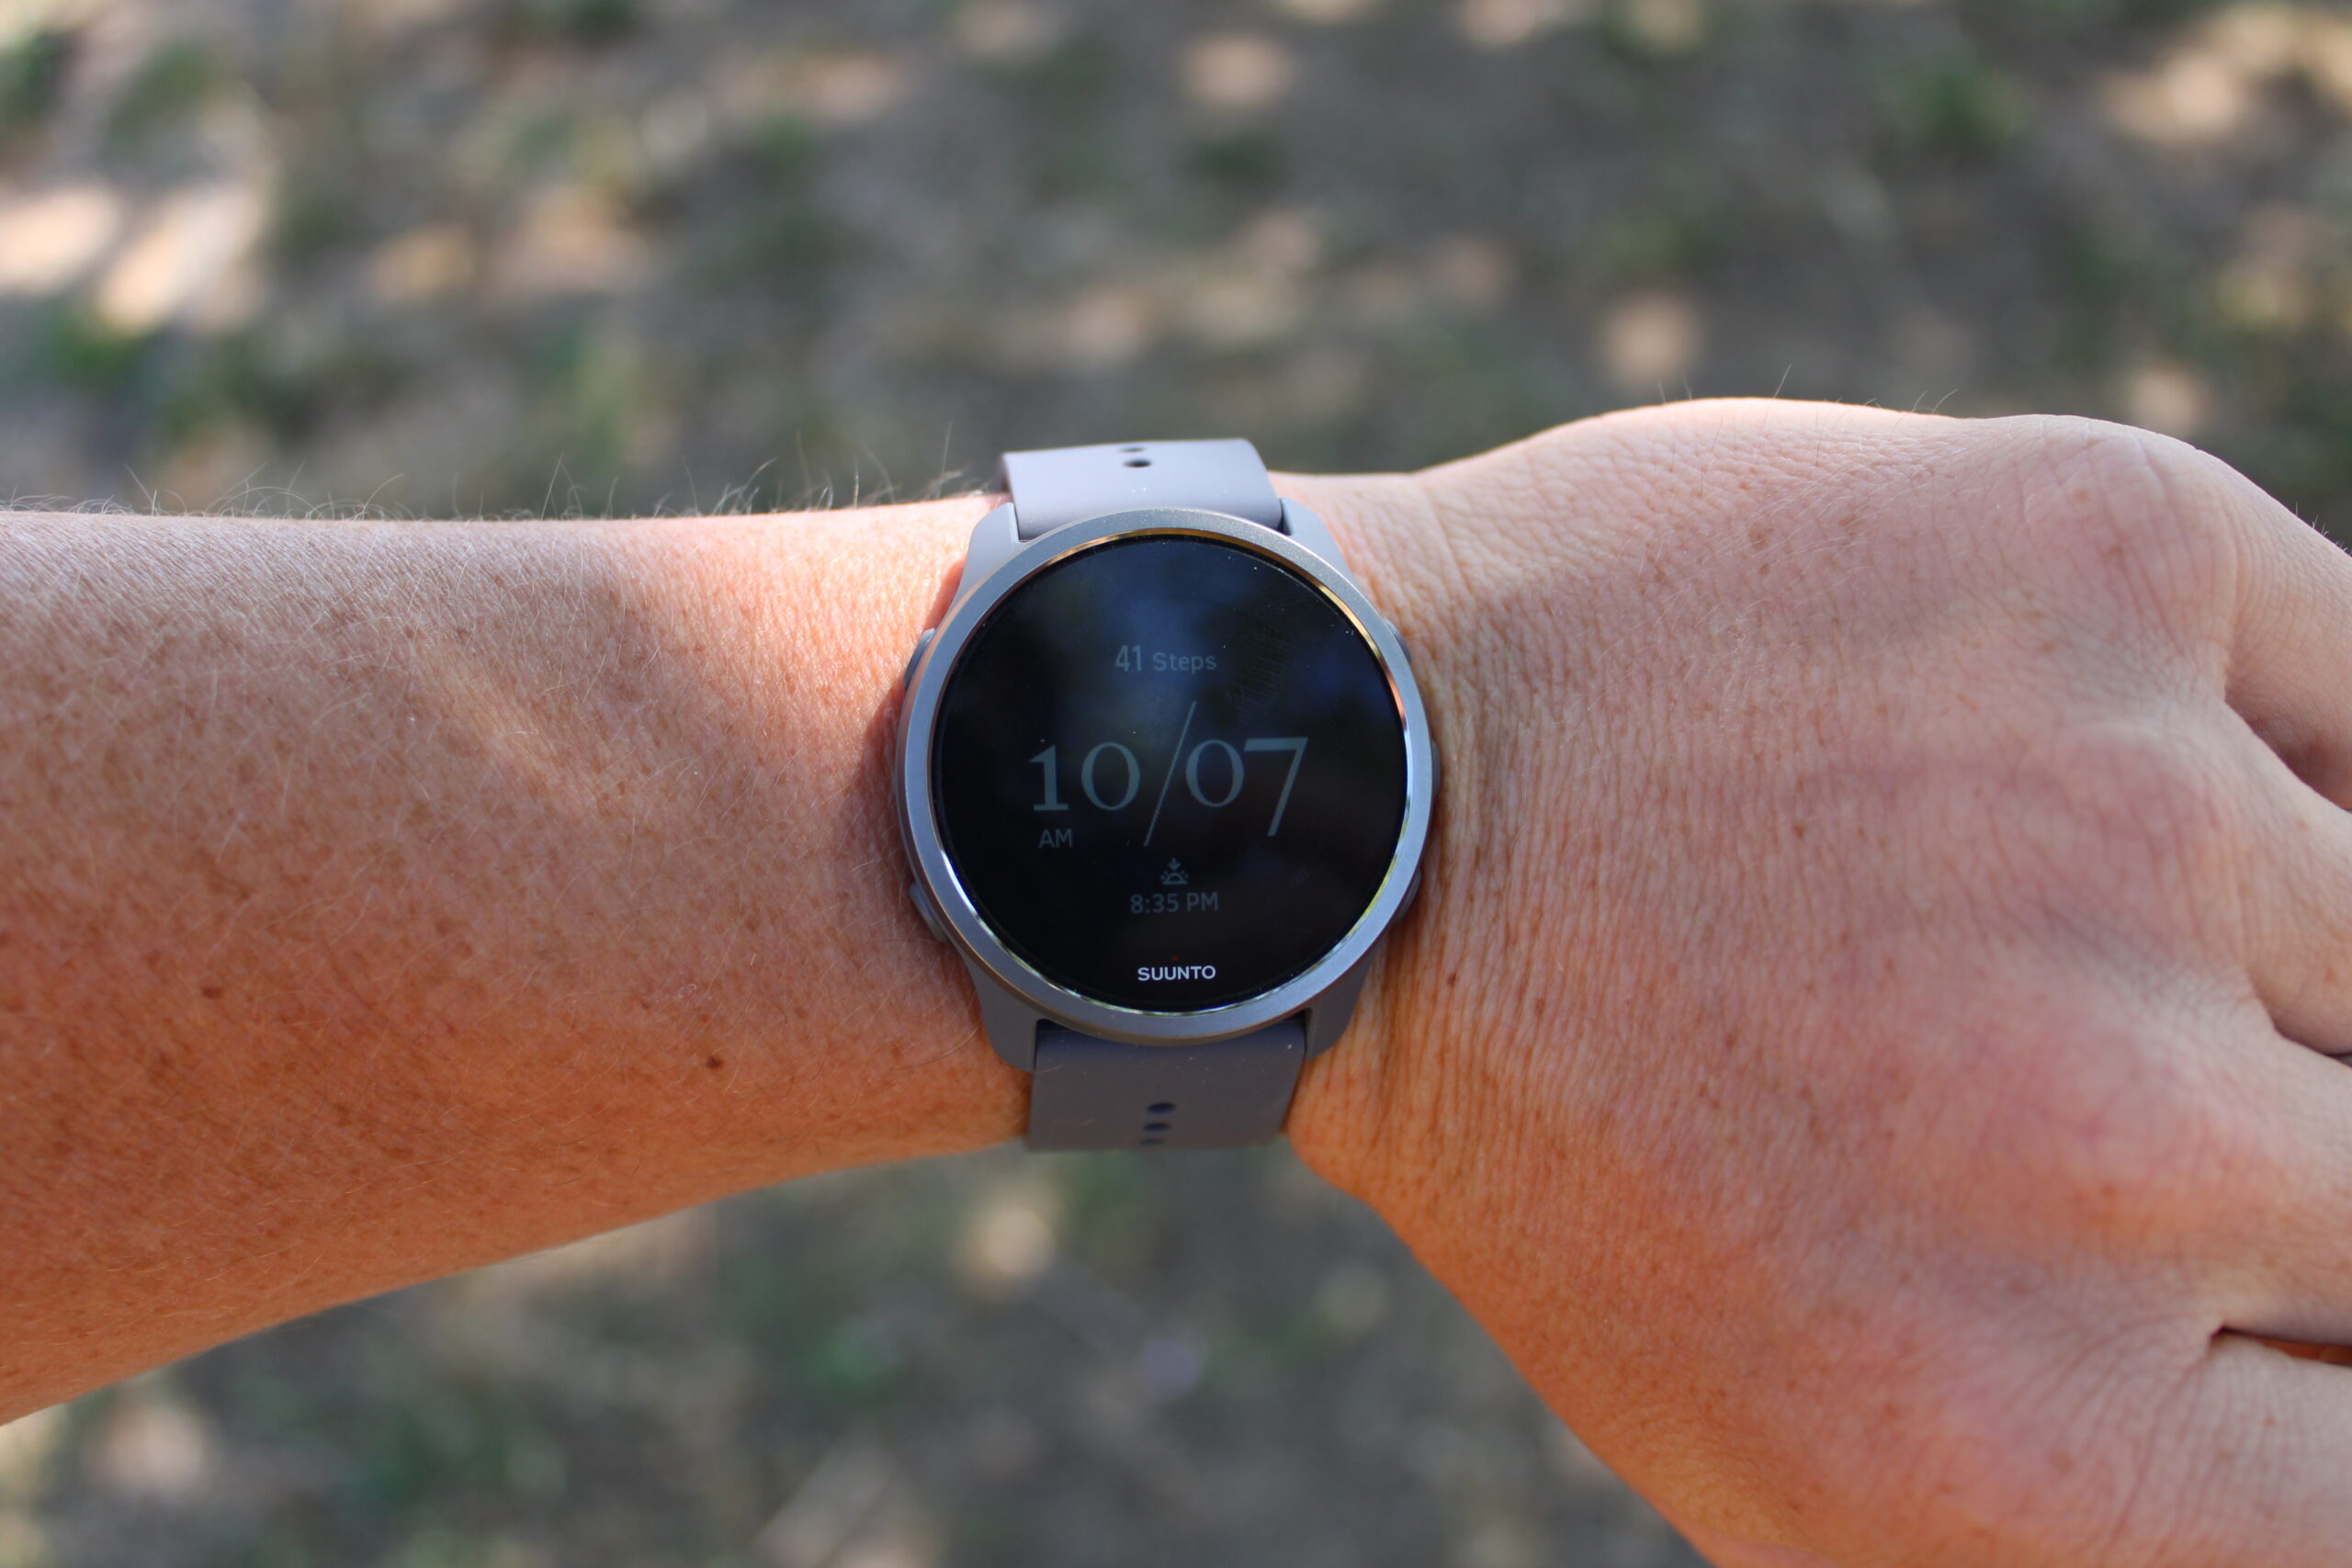 The Suunto GPS Watch is one of the best